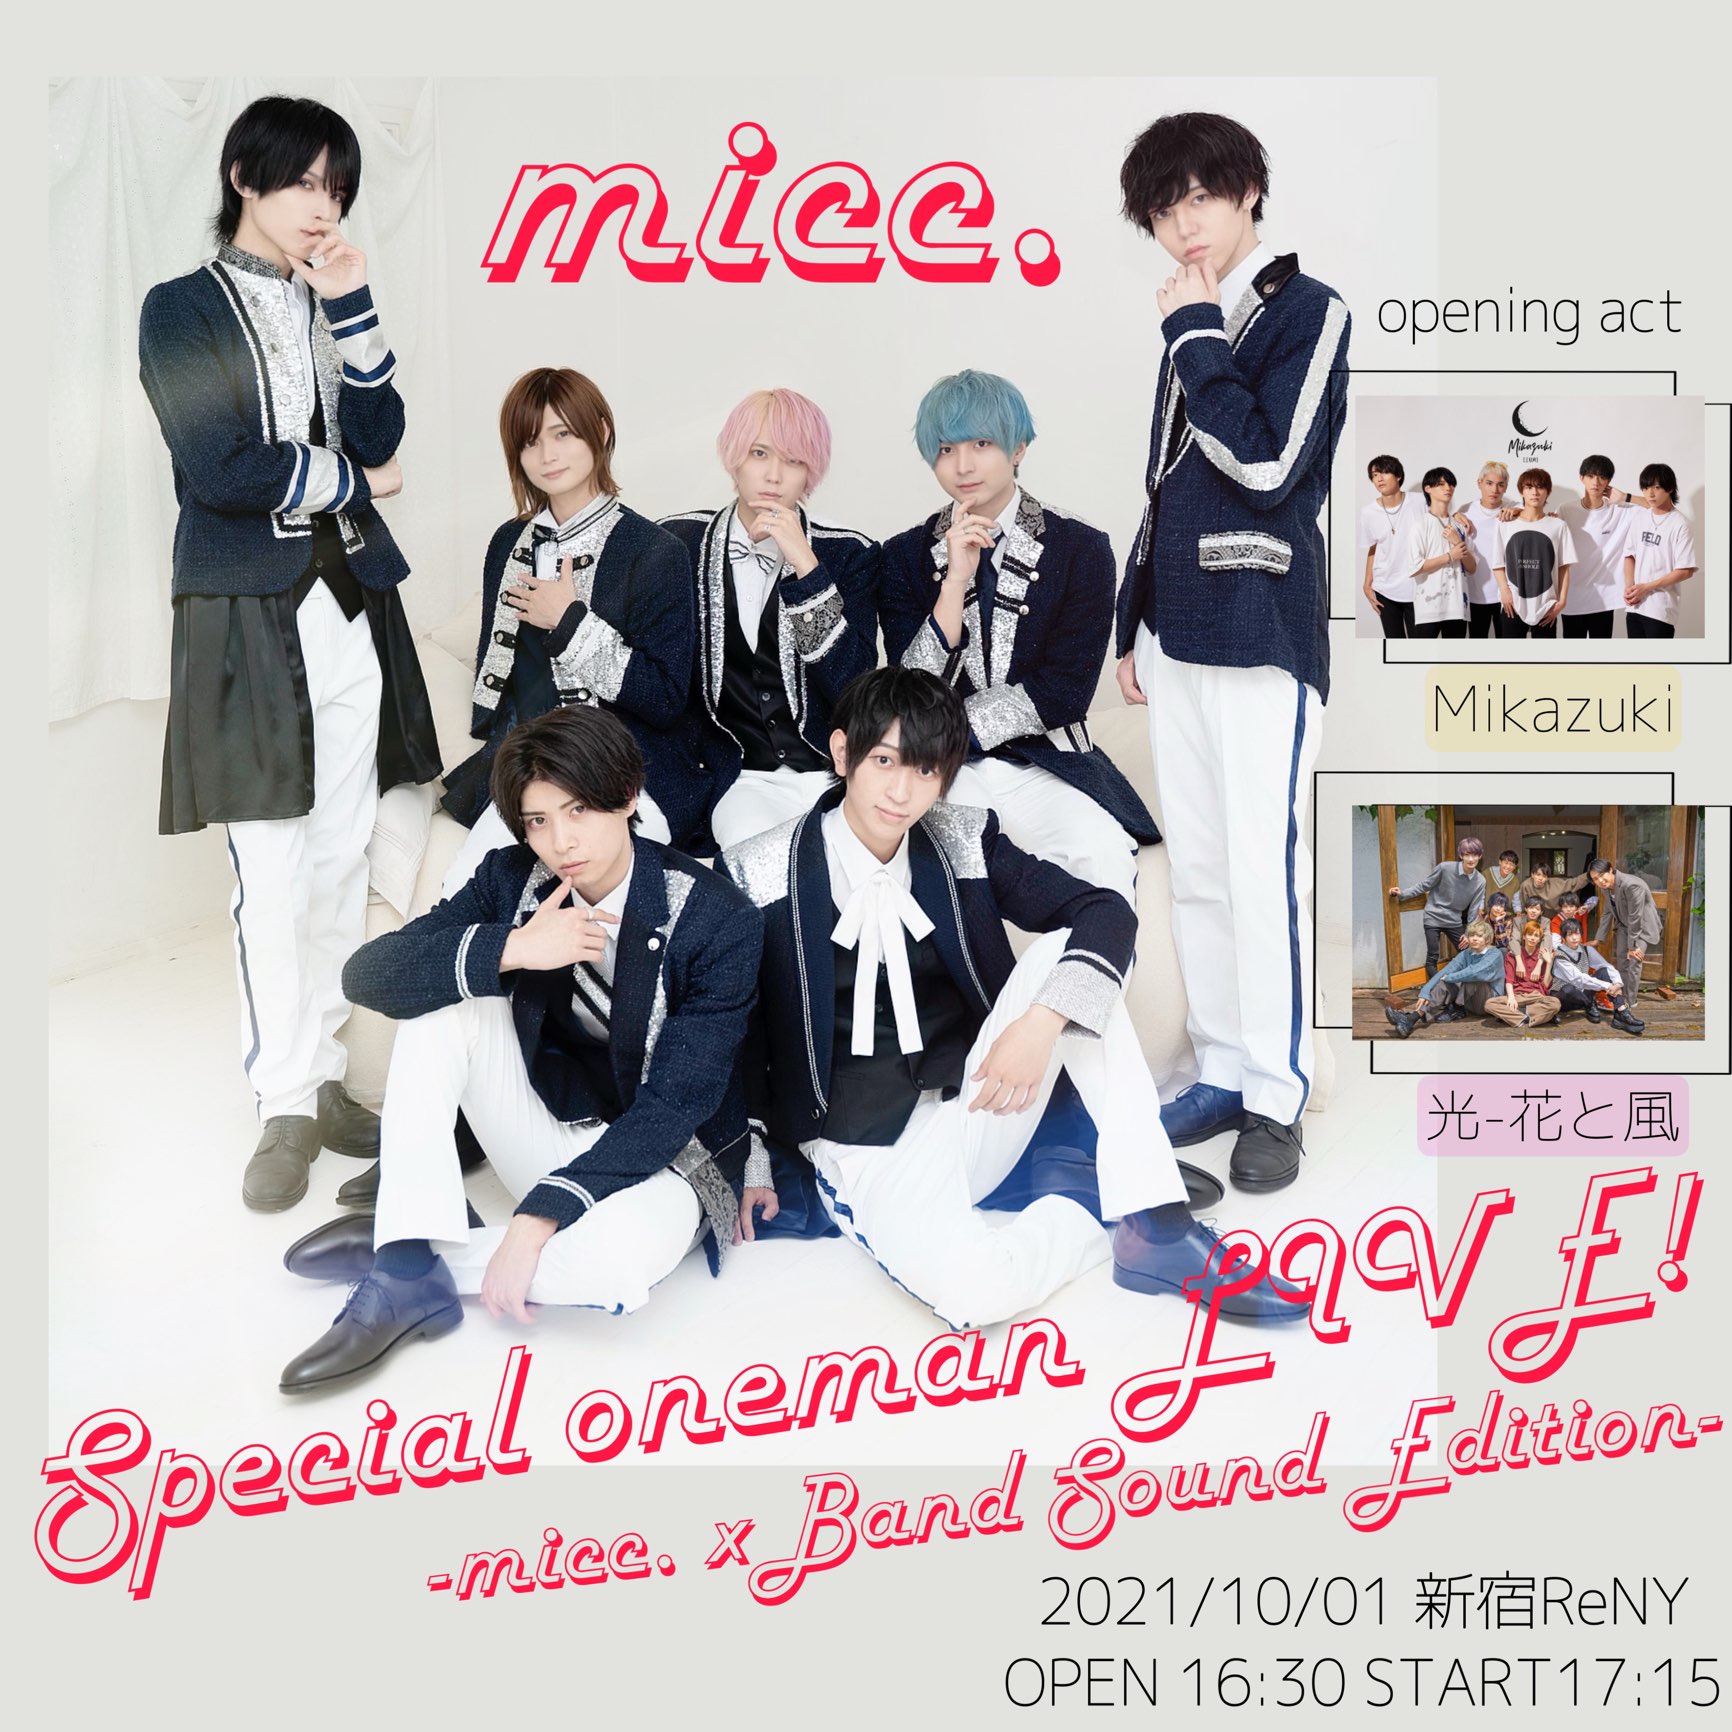 『micc. special oneman LIVE!-micc.×Band sound Edition-』